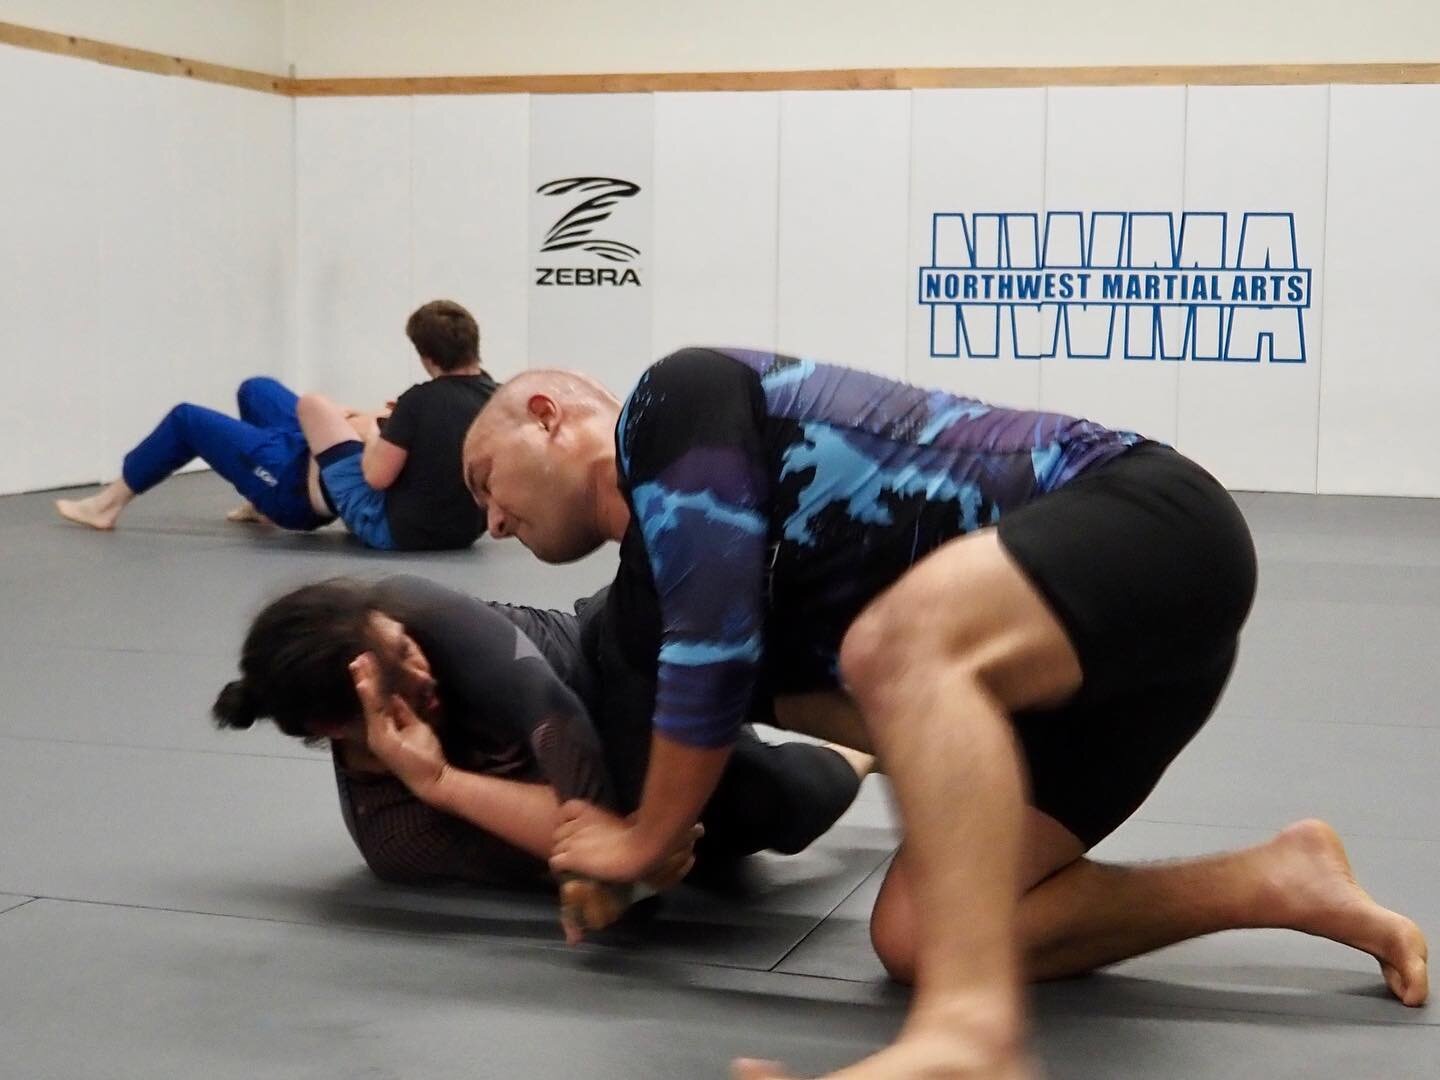 Our adult fundamentals is growing and we have spots open! Uniform is not required, come join us every Monday, Wednesday, and Friday 😊

email nwmacoosbay@gmail.com or call/text 541-808-1638 

#coosbayoregon #jiujitsu